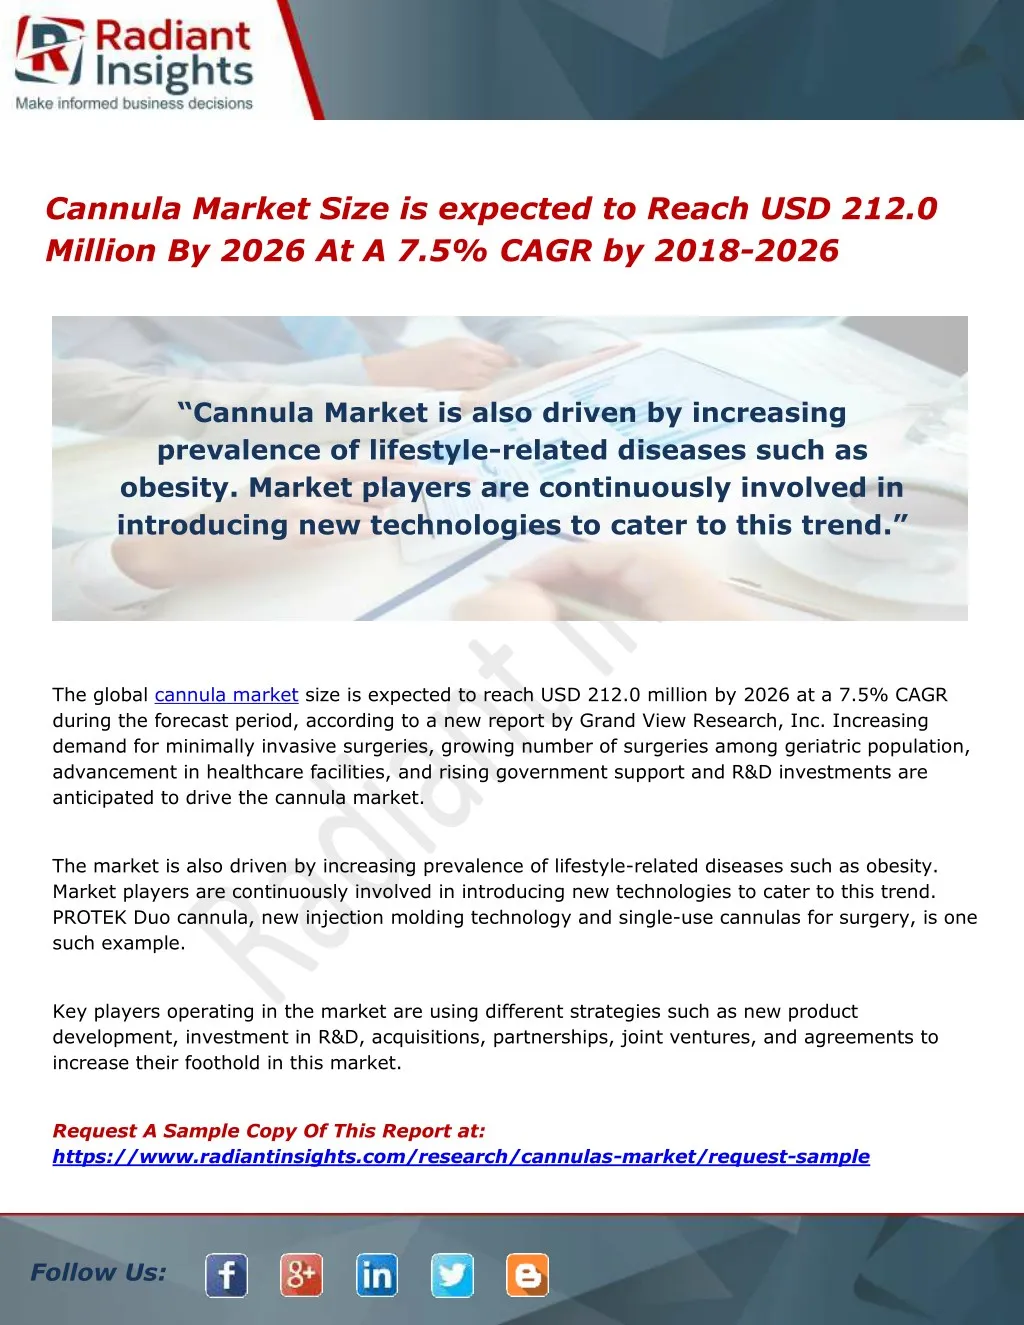 cannula market size is expected to reach